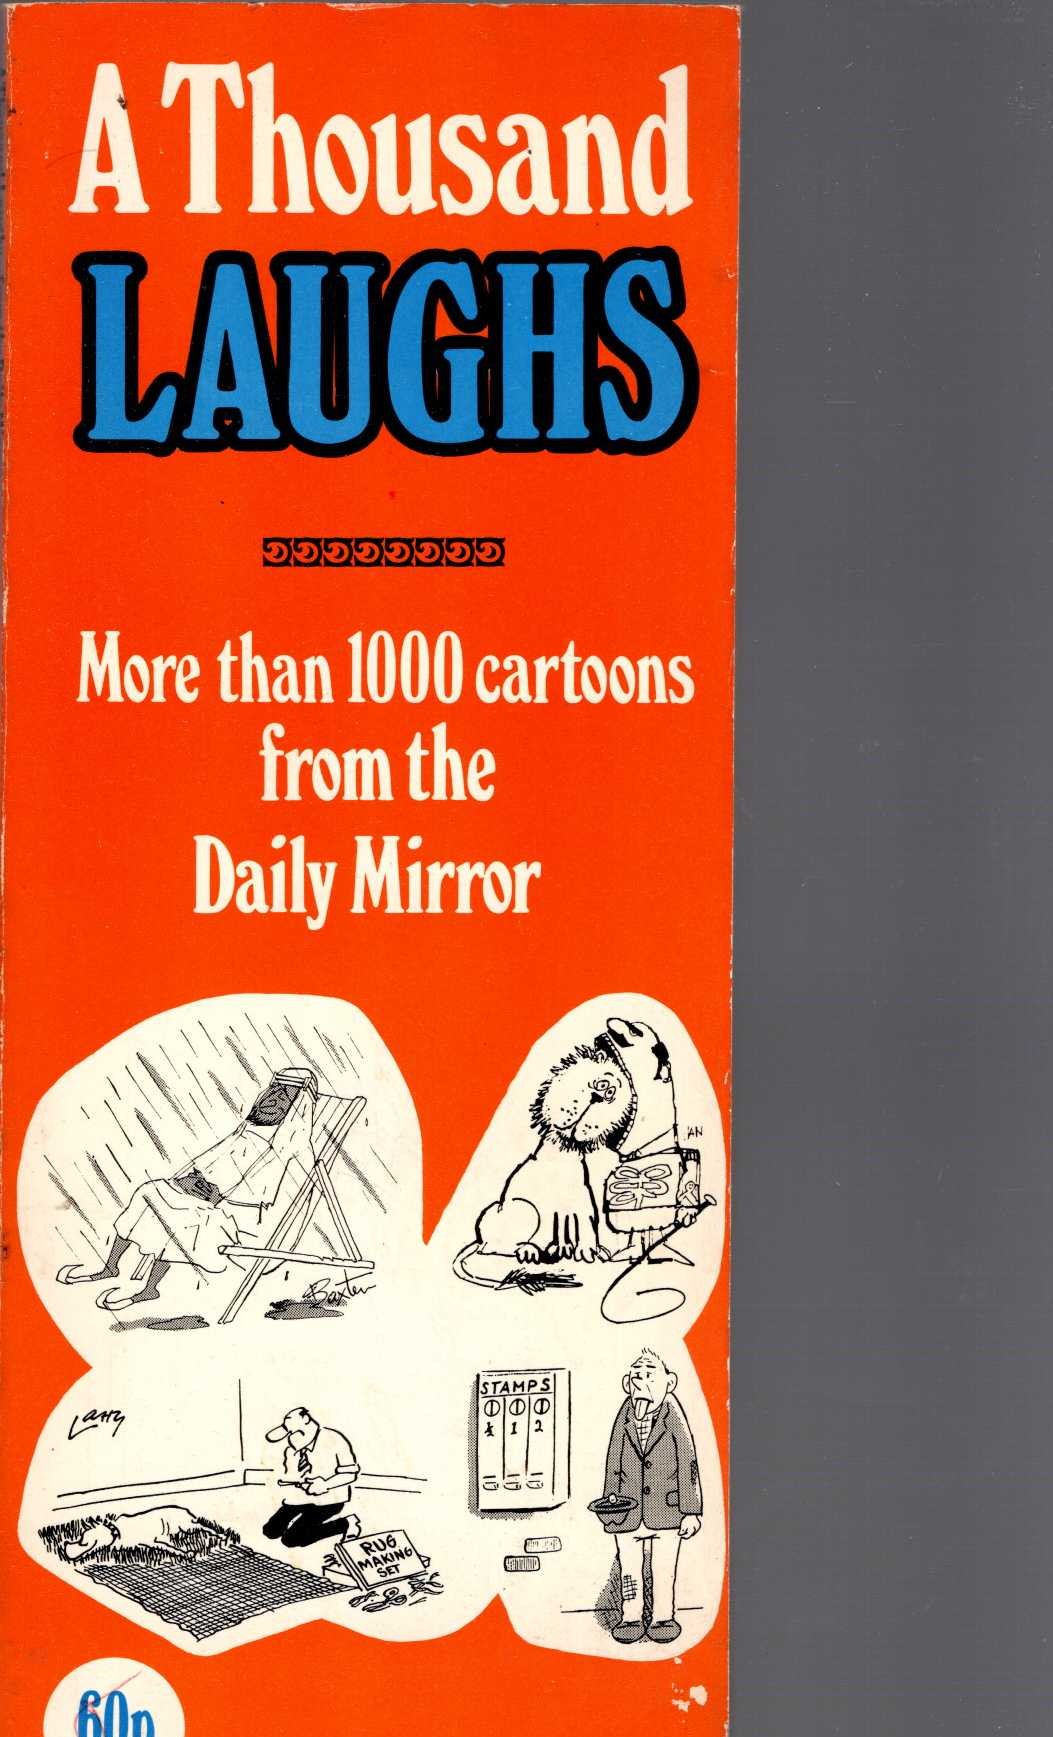 The Daily Mirror  A THOUSAND LAUGHS front book cover image